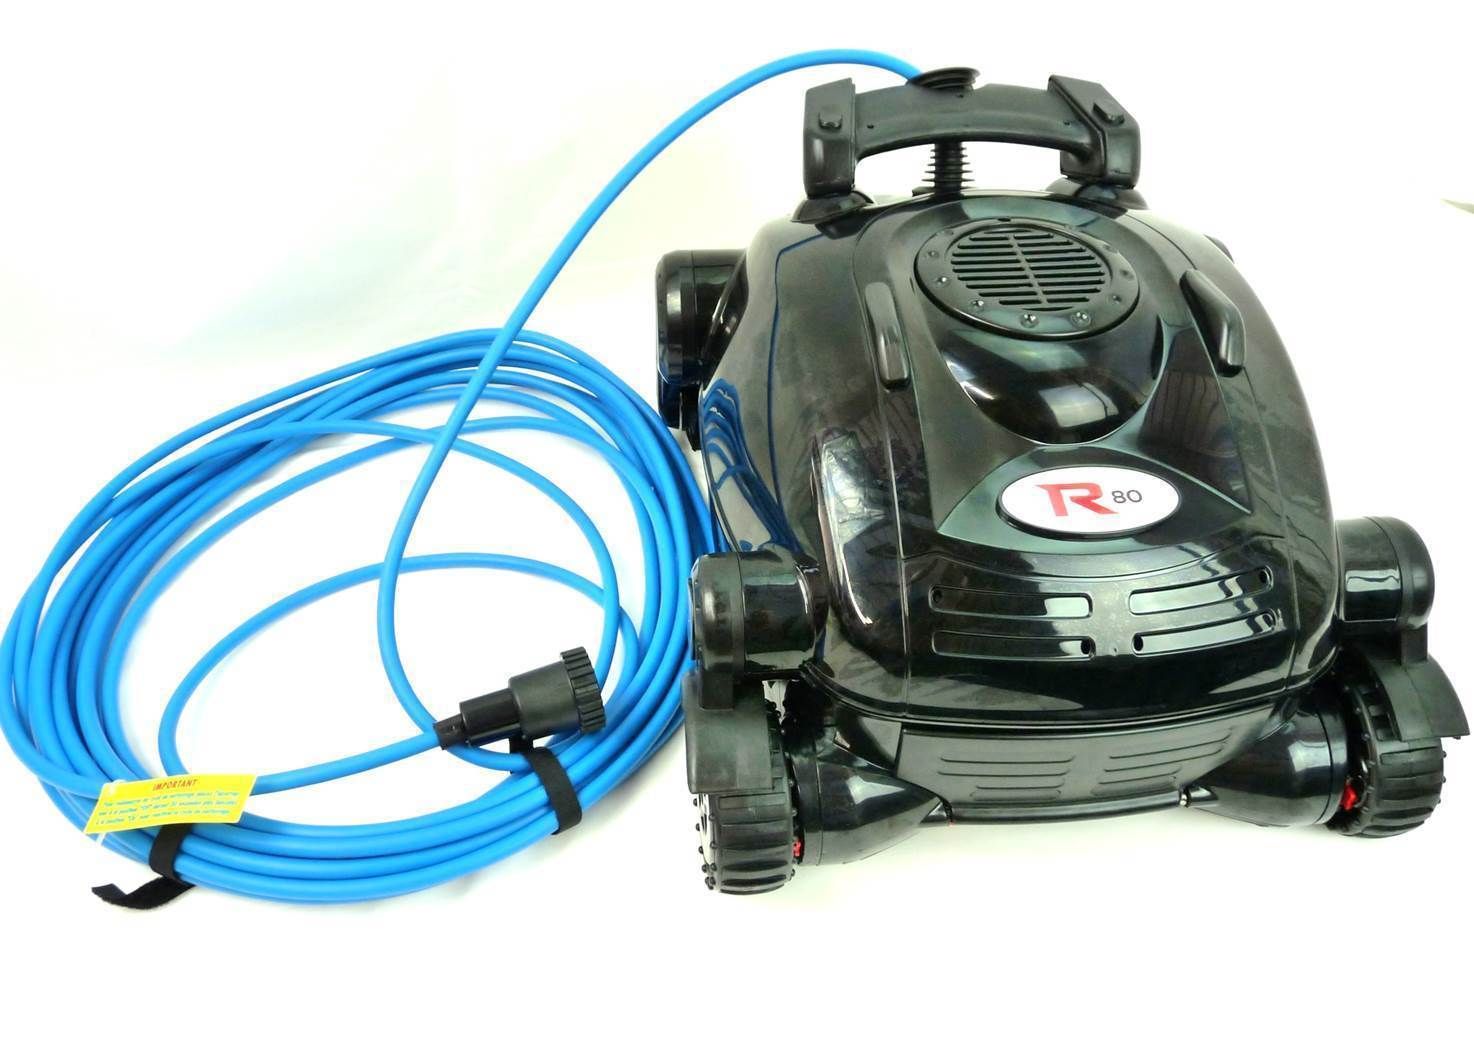 New R80 robotic swimming pool cleaner- Waterco robot Admiral Pool cleaner 326371